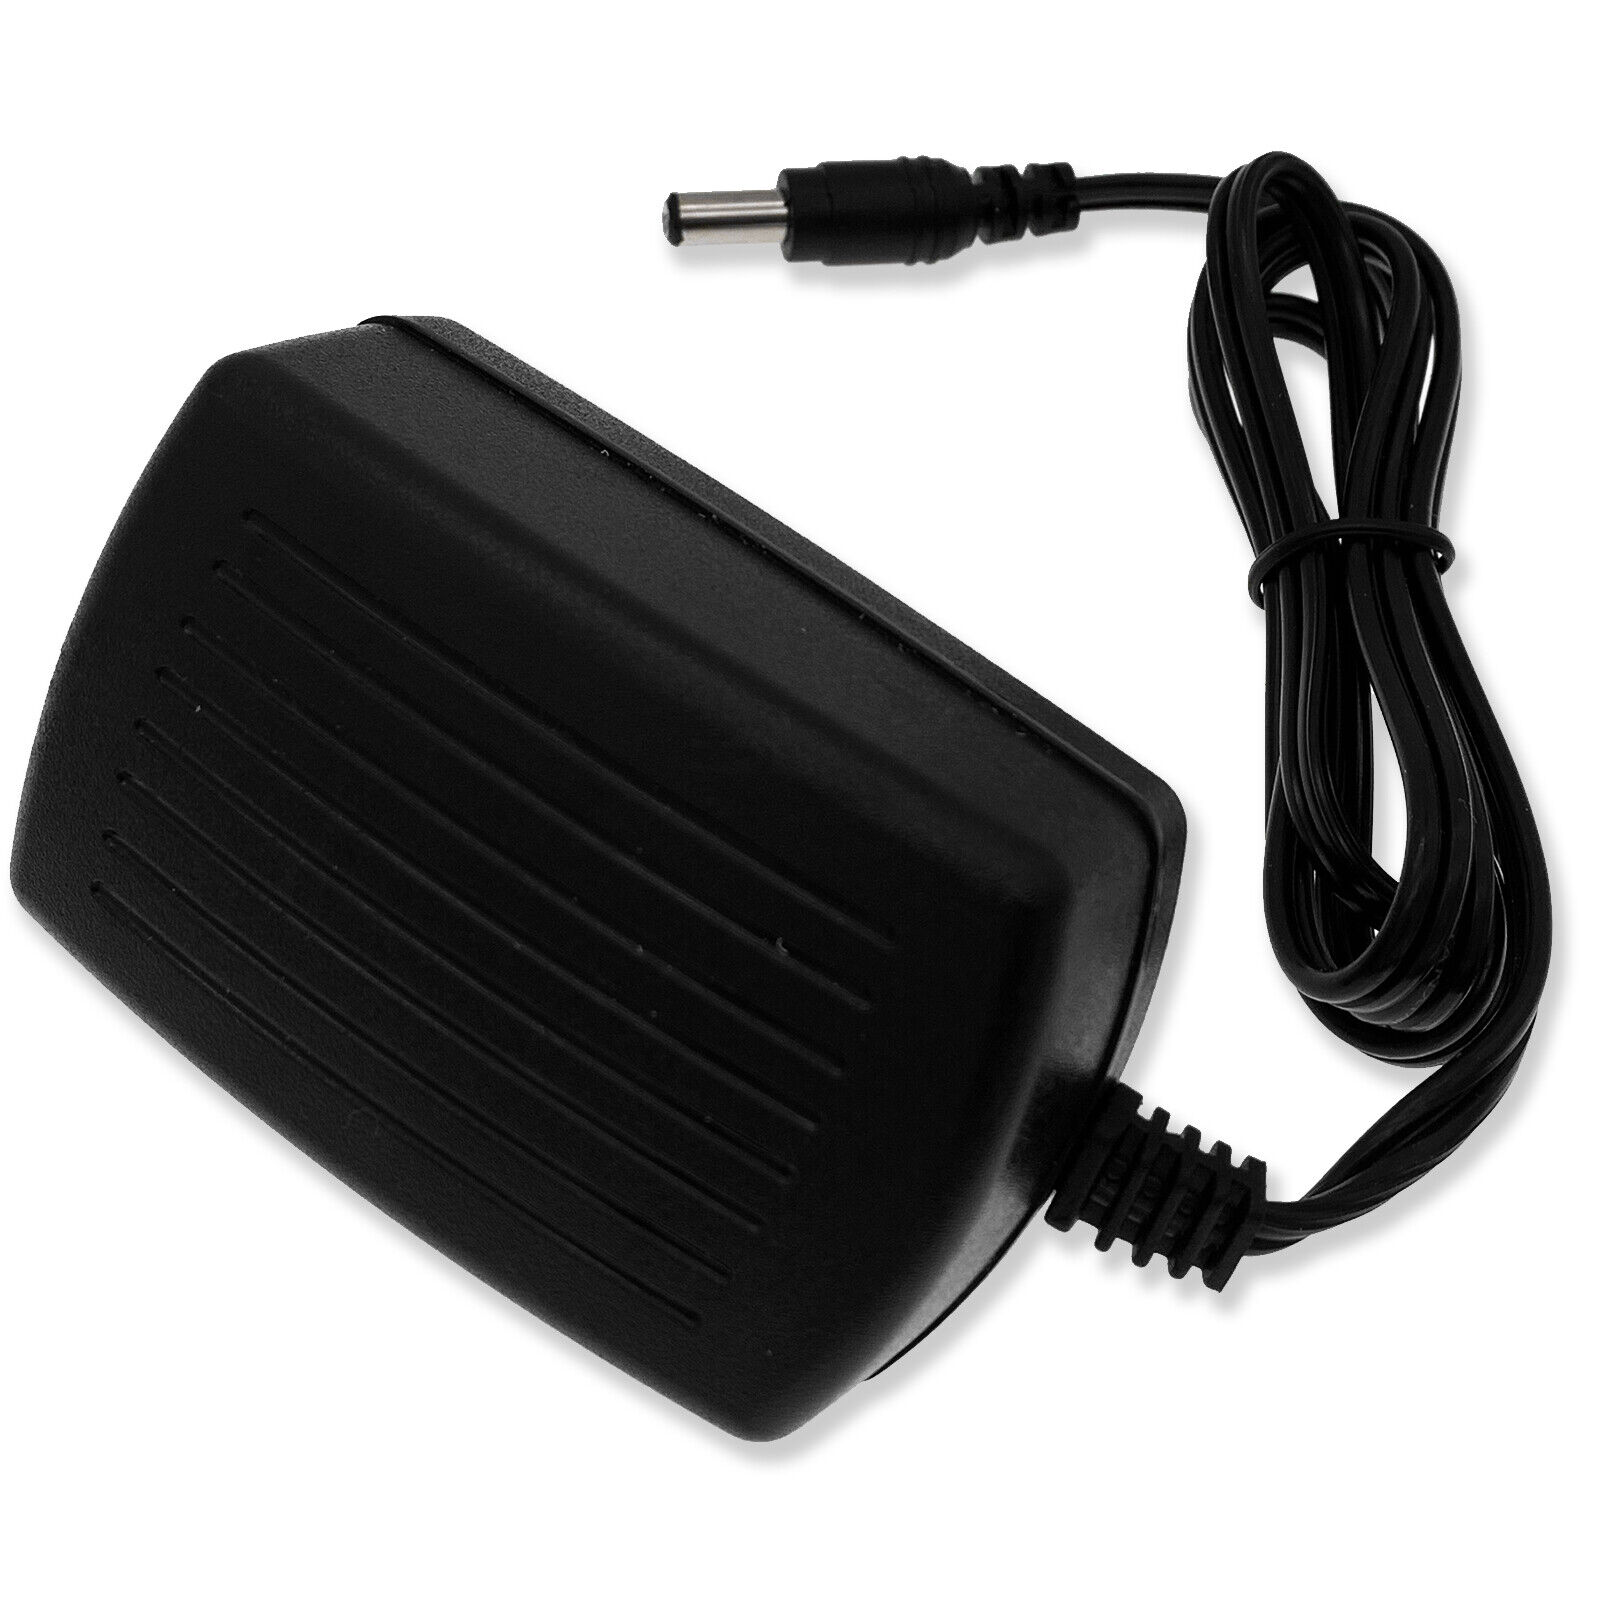 5ft 9V AC 1A Adapter For Alesis SR16 Drum machine replacement power supply Country/Region of Manufacture United States